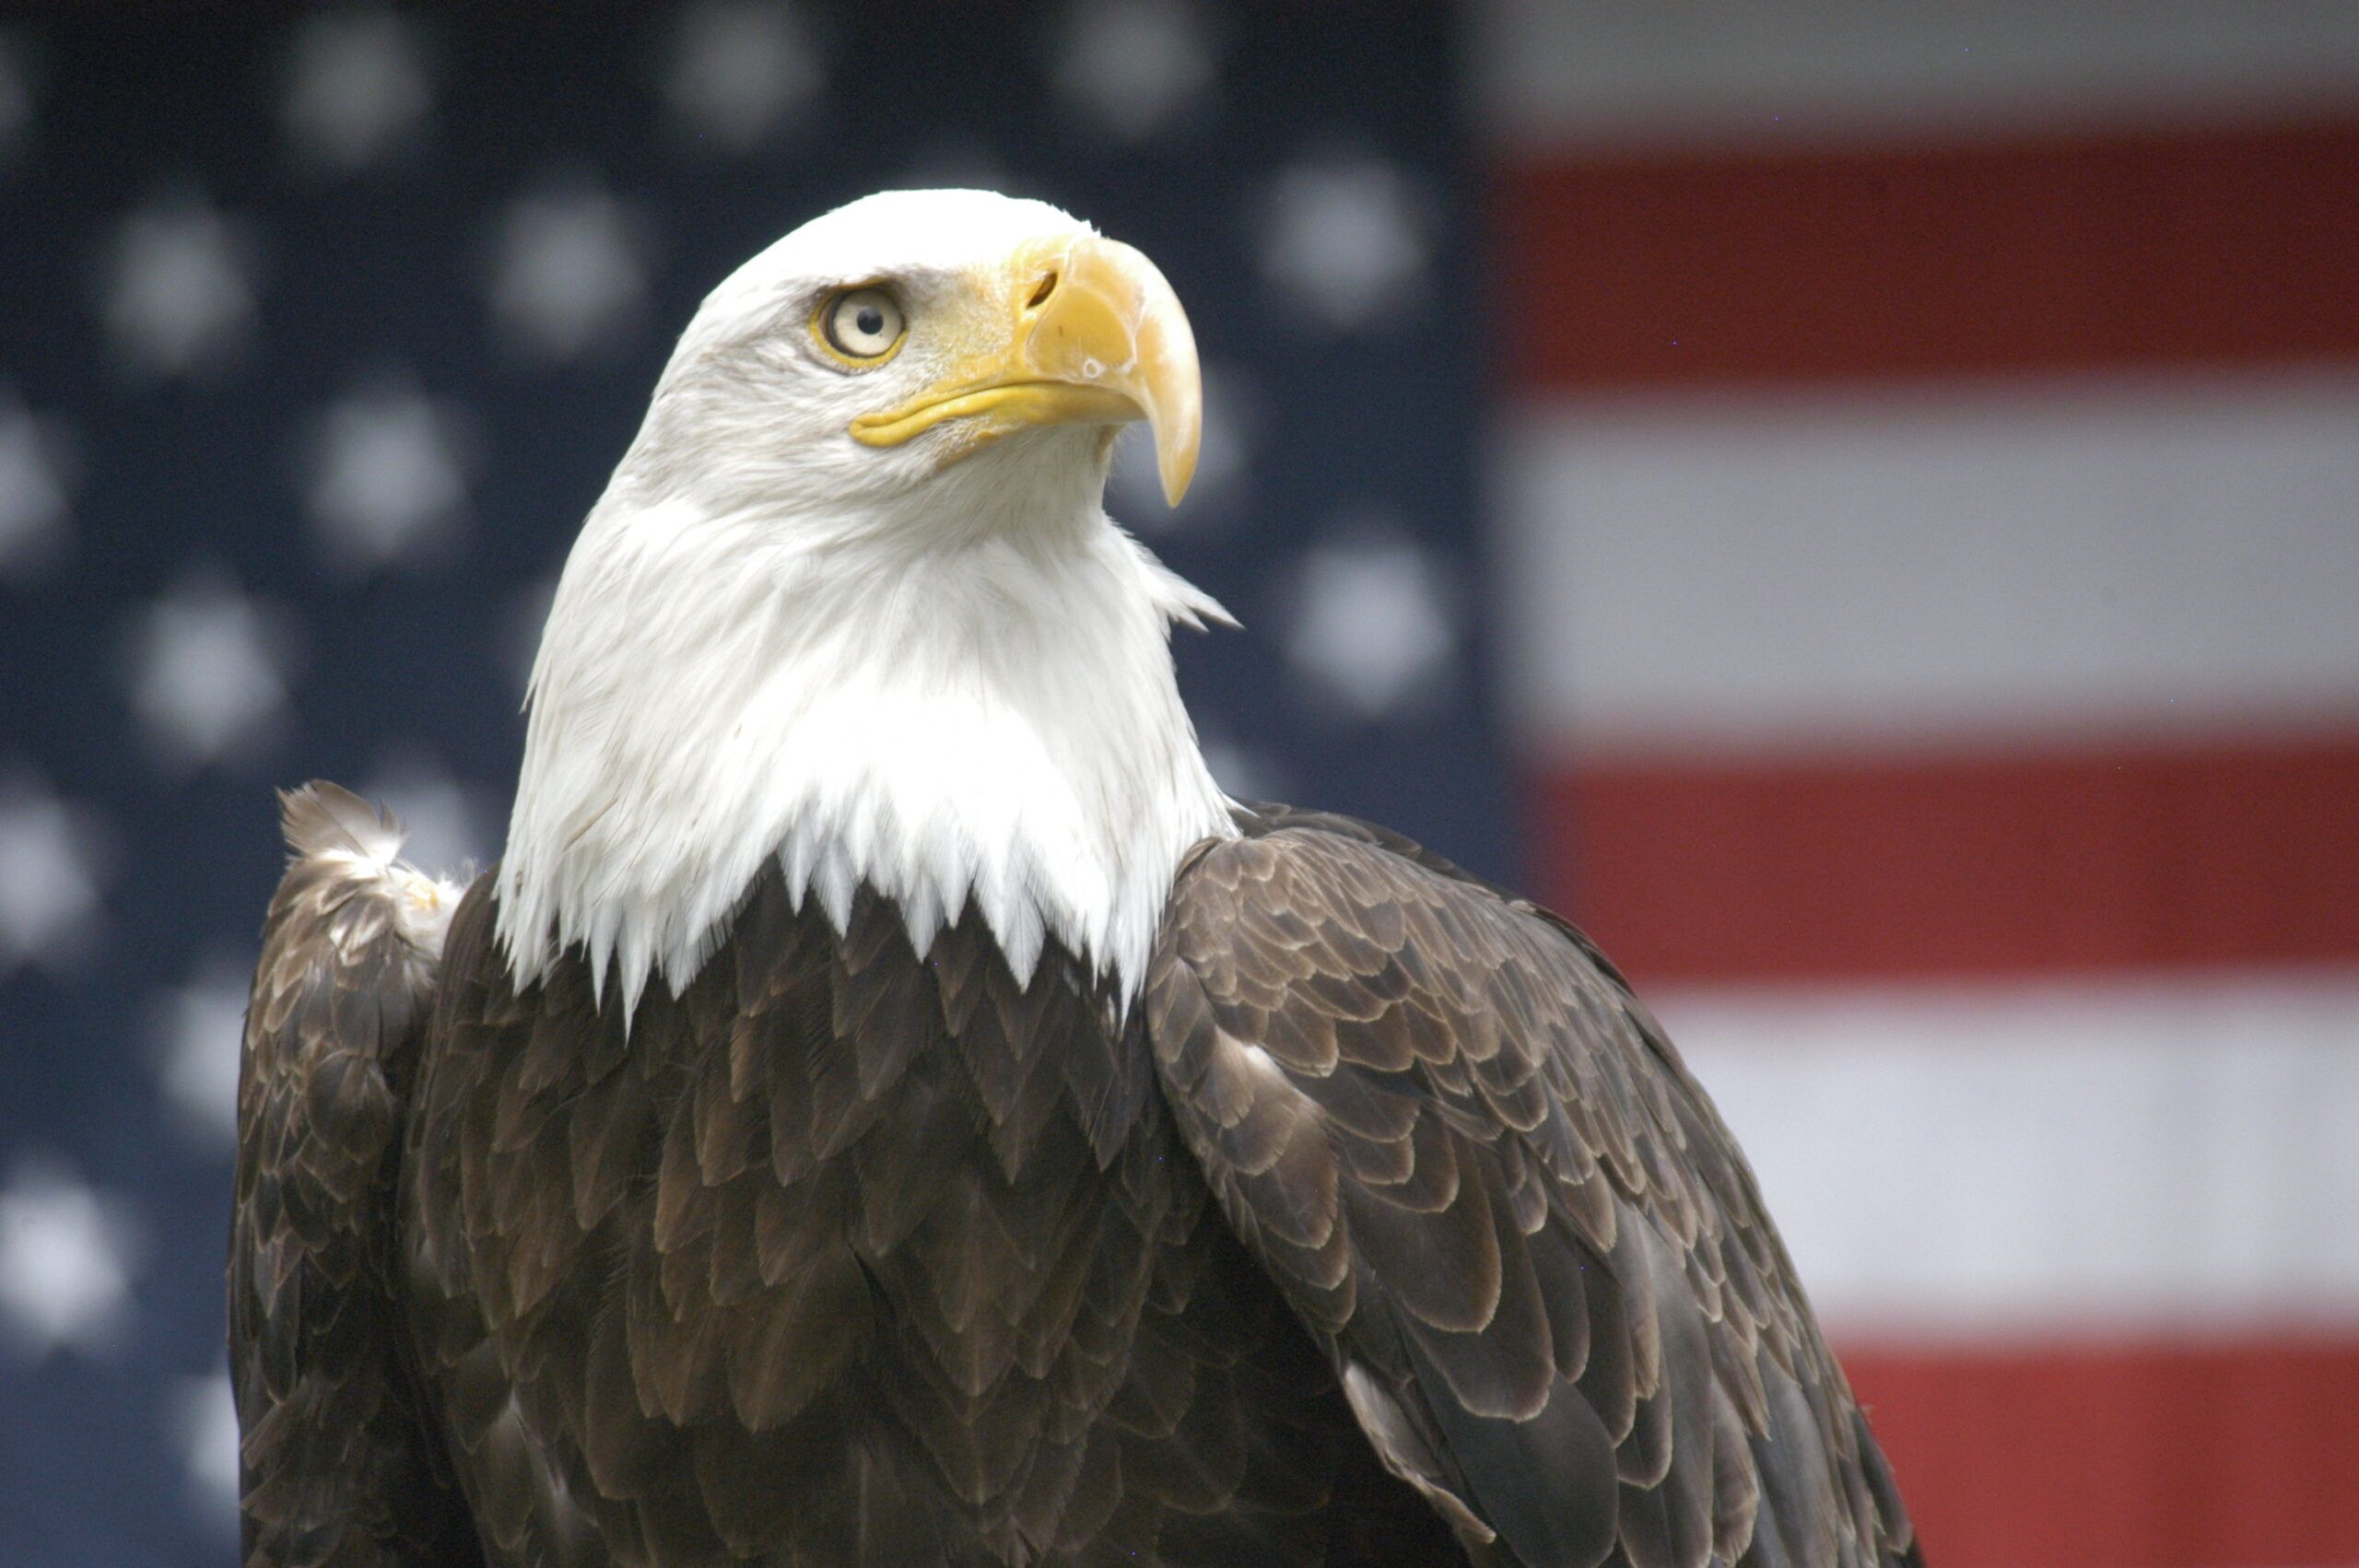 Bald Eagle with an American flag